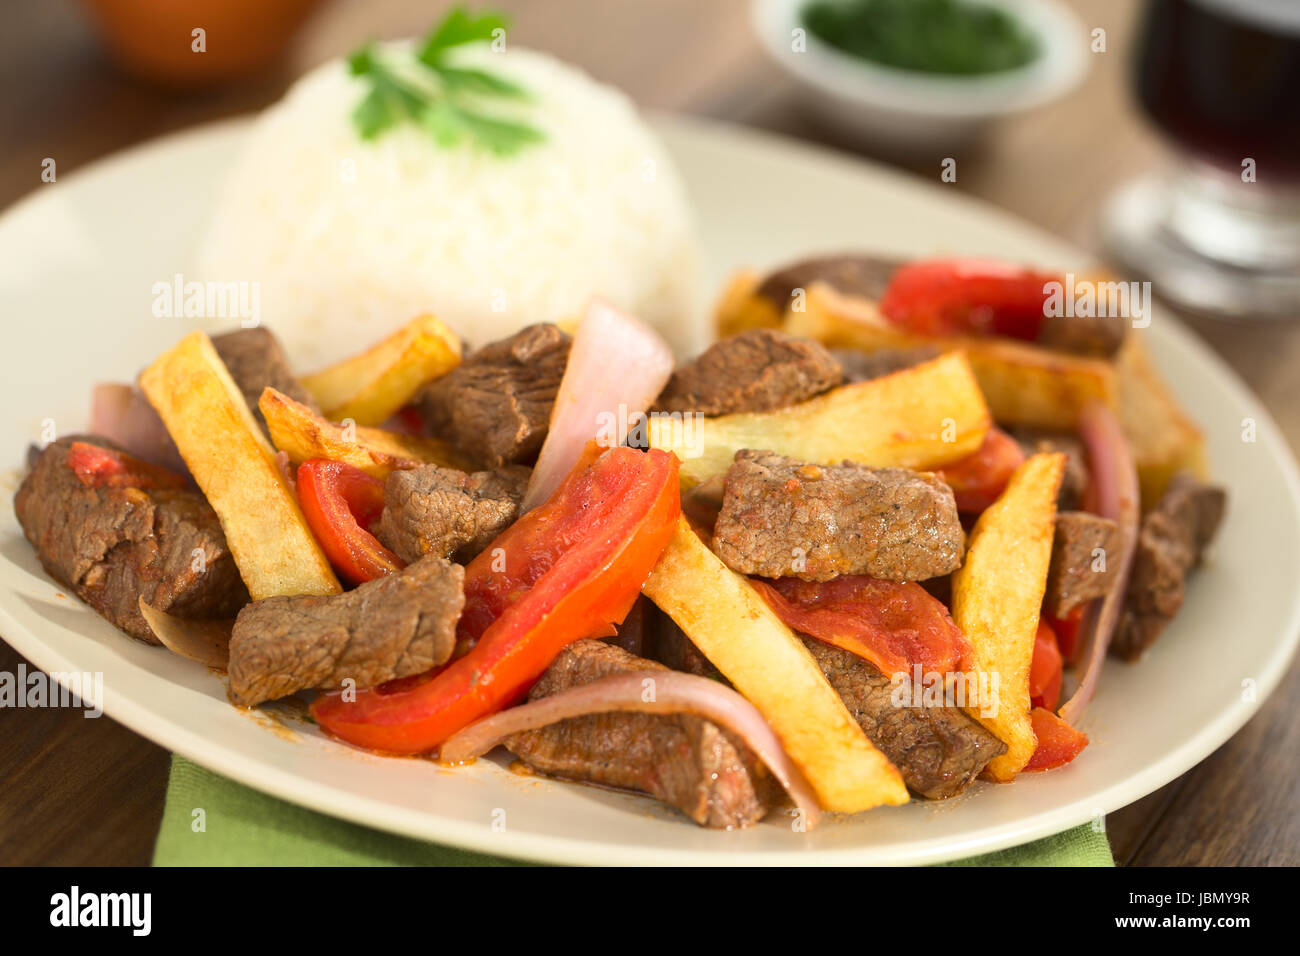 Peruvian dish called Lomo Saltado made of beef, tomato, red onion and French fries, served with rice (Selective Focus, Focus one third into the dish) Stock Photo